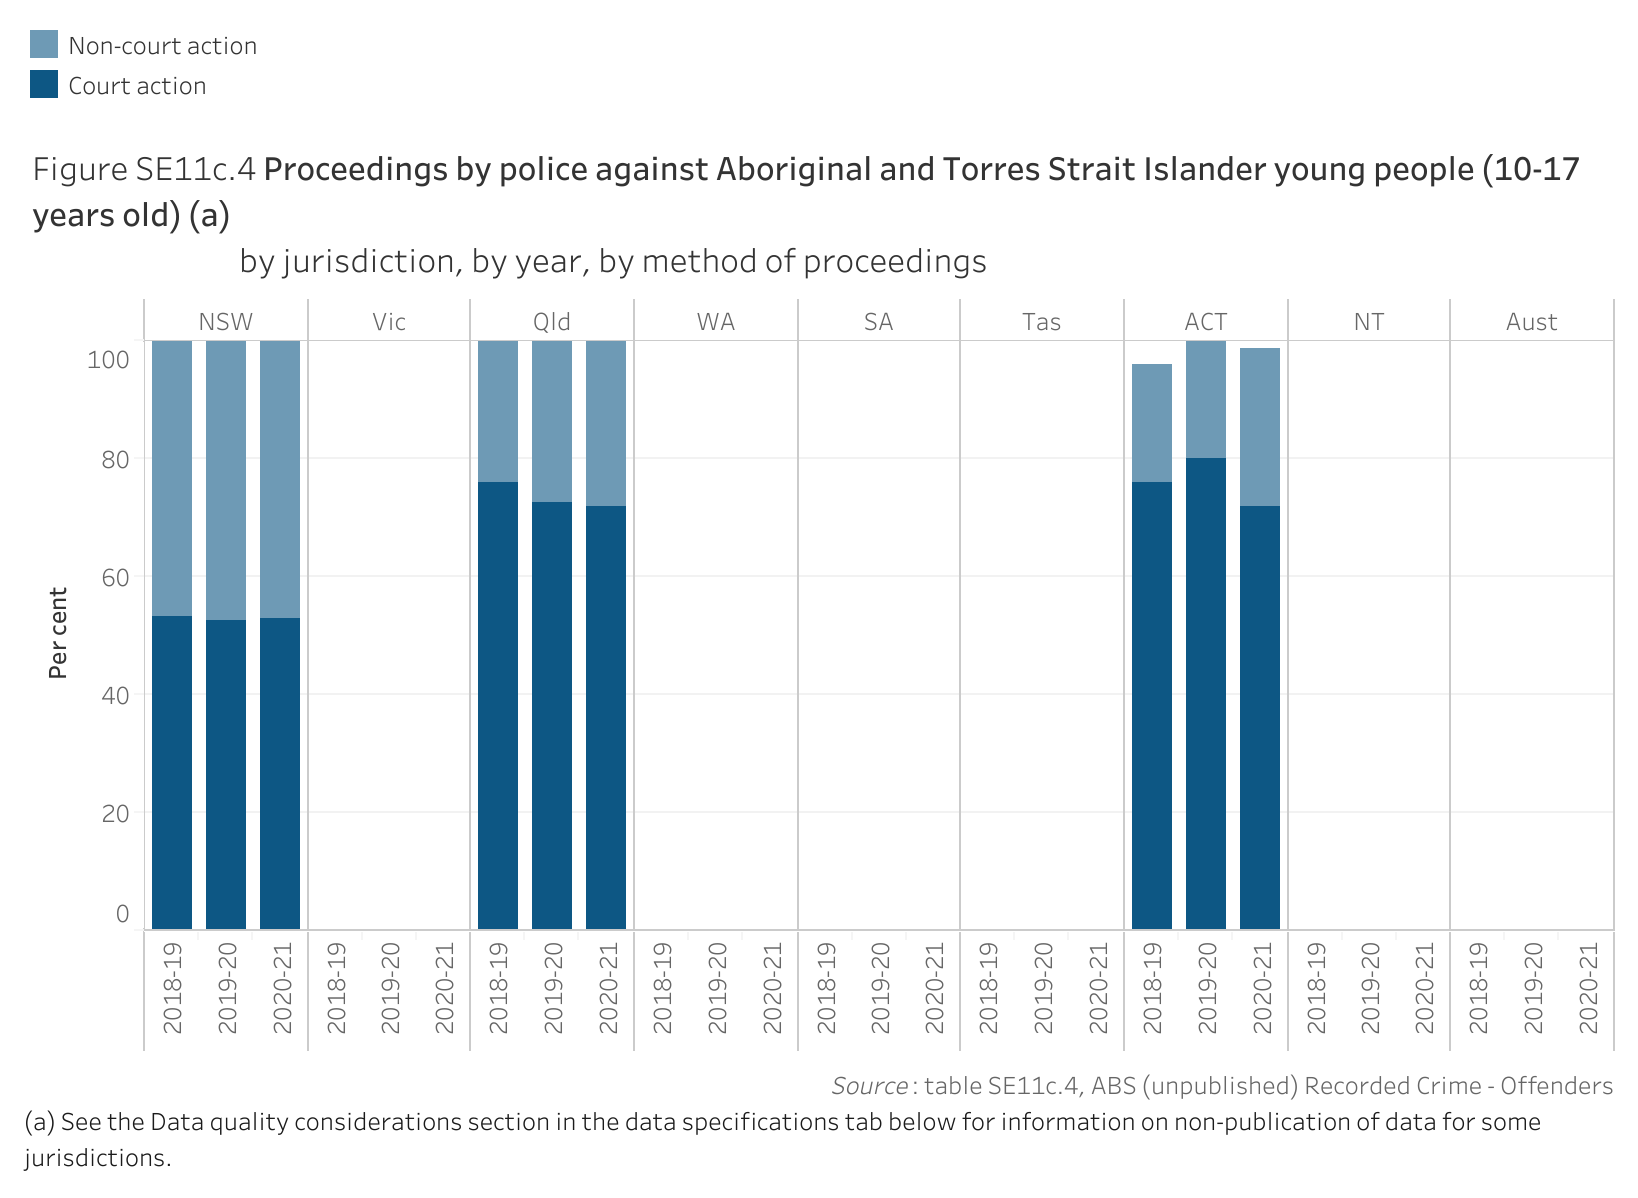 Figure SE11c.4. Bar chart showing the proportion of proceedings by police against Aboriginal and Torres Strait Islander young people (10-17 years old) that were non-court or court action, by jurisdiction, by year and by method of proceedings. Data table of figure SE11c.4 is below.